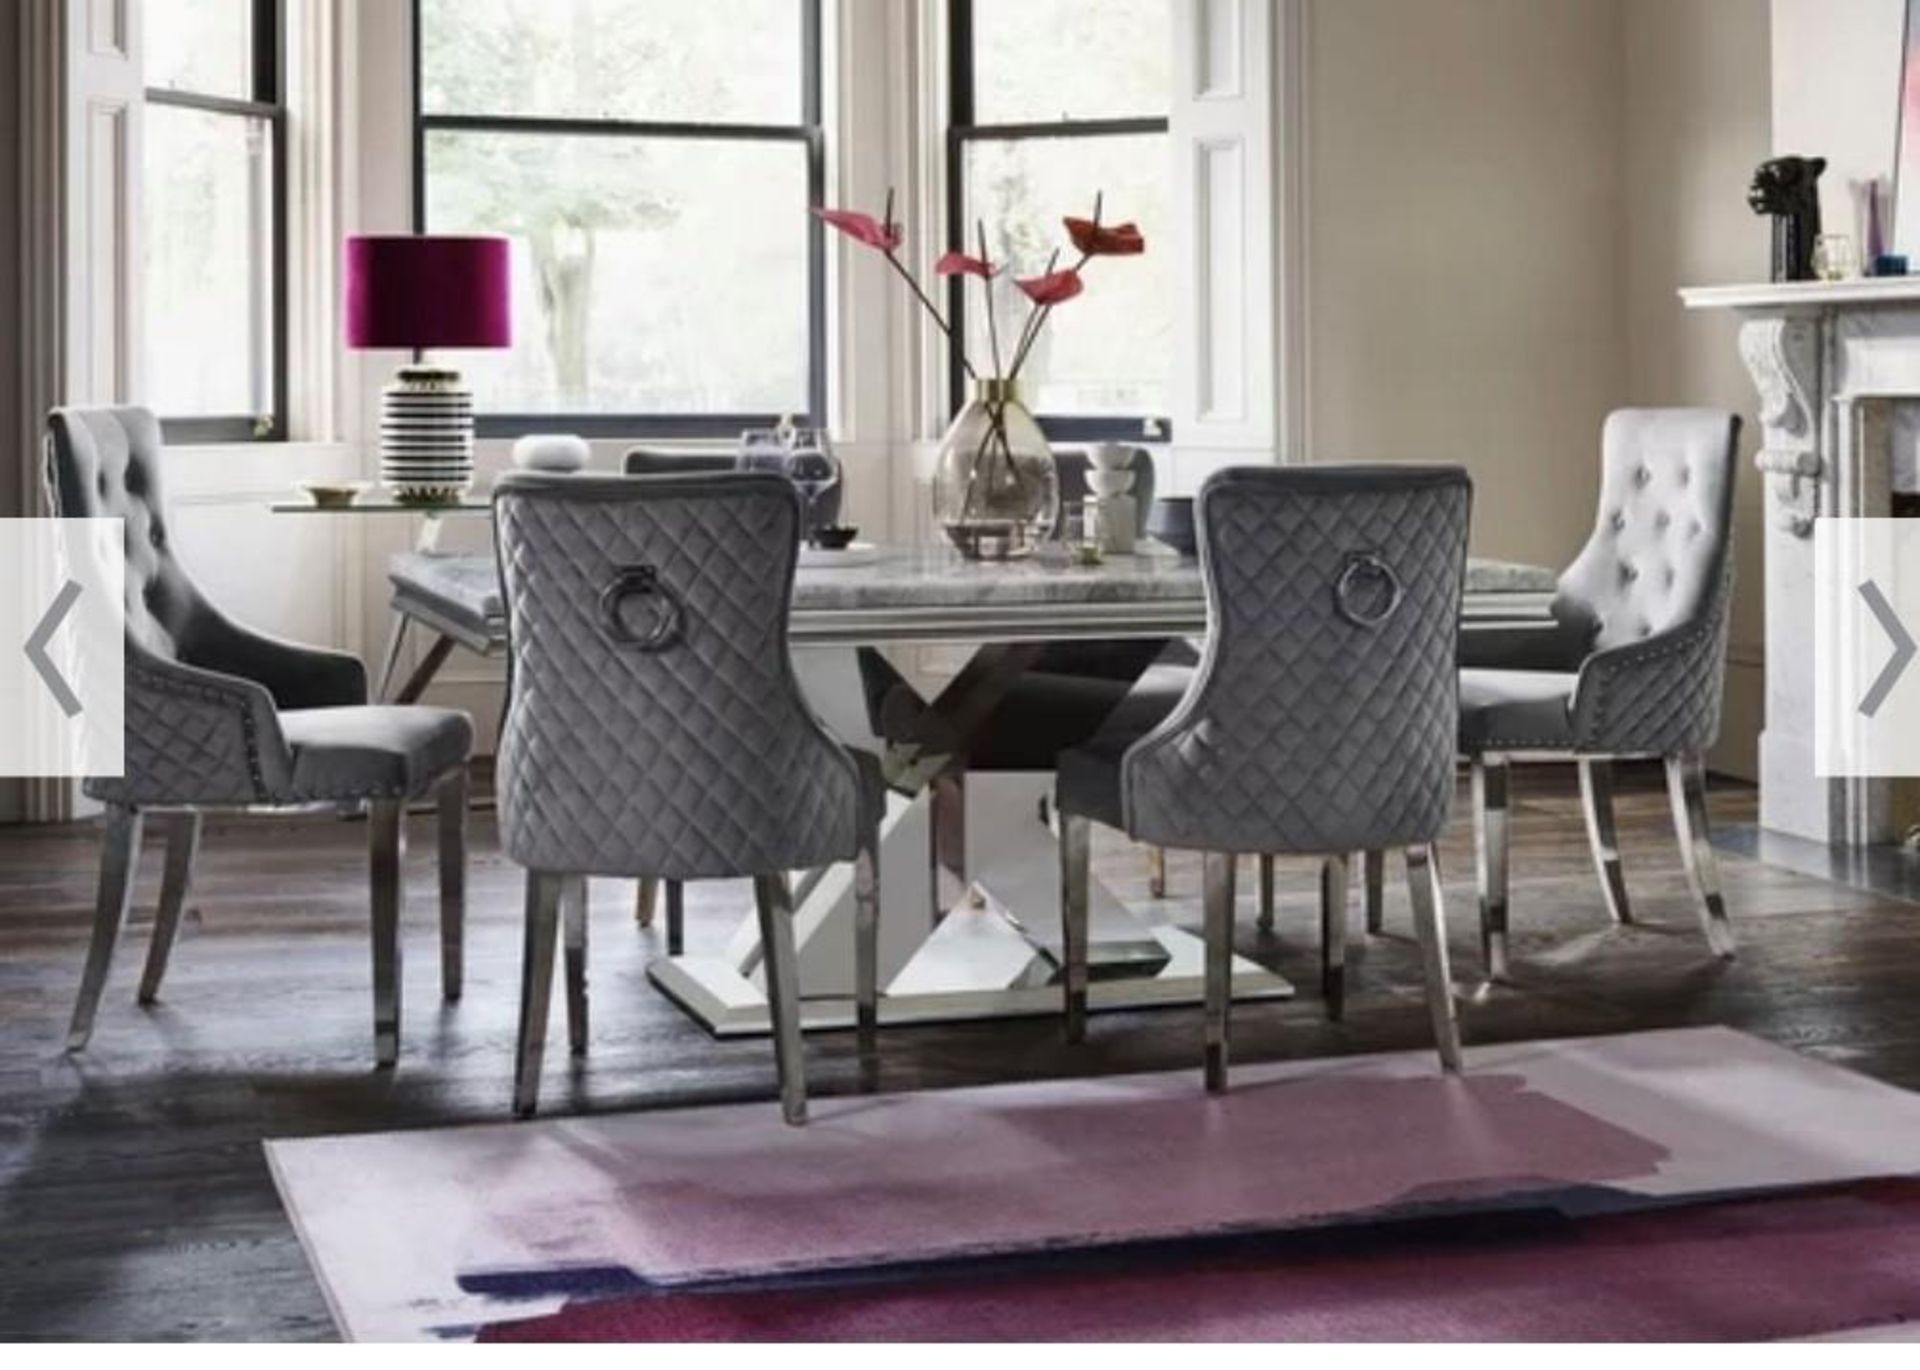 *BRAND NEW* Furniture Village Dolce large grey marble dining table + 6 chairs in velvet RRP: £2249